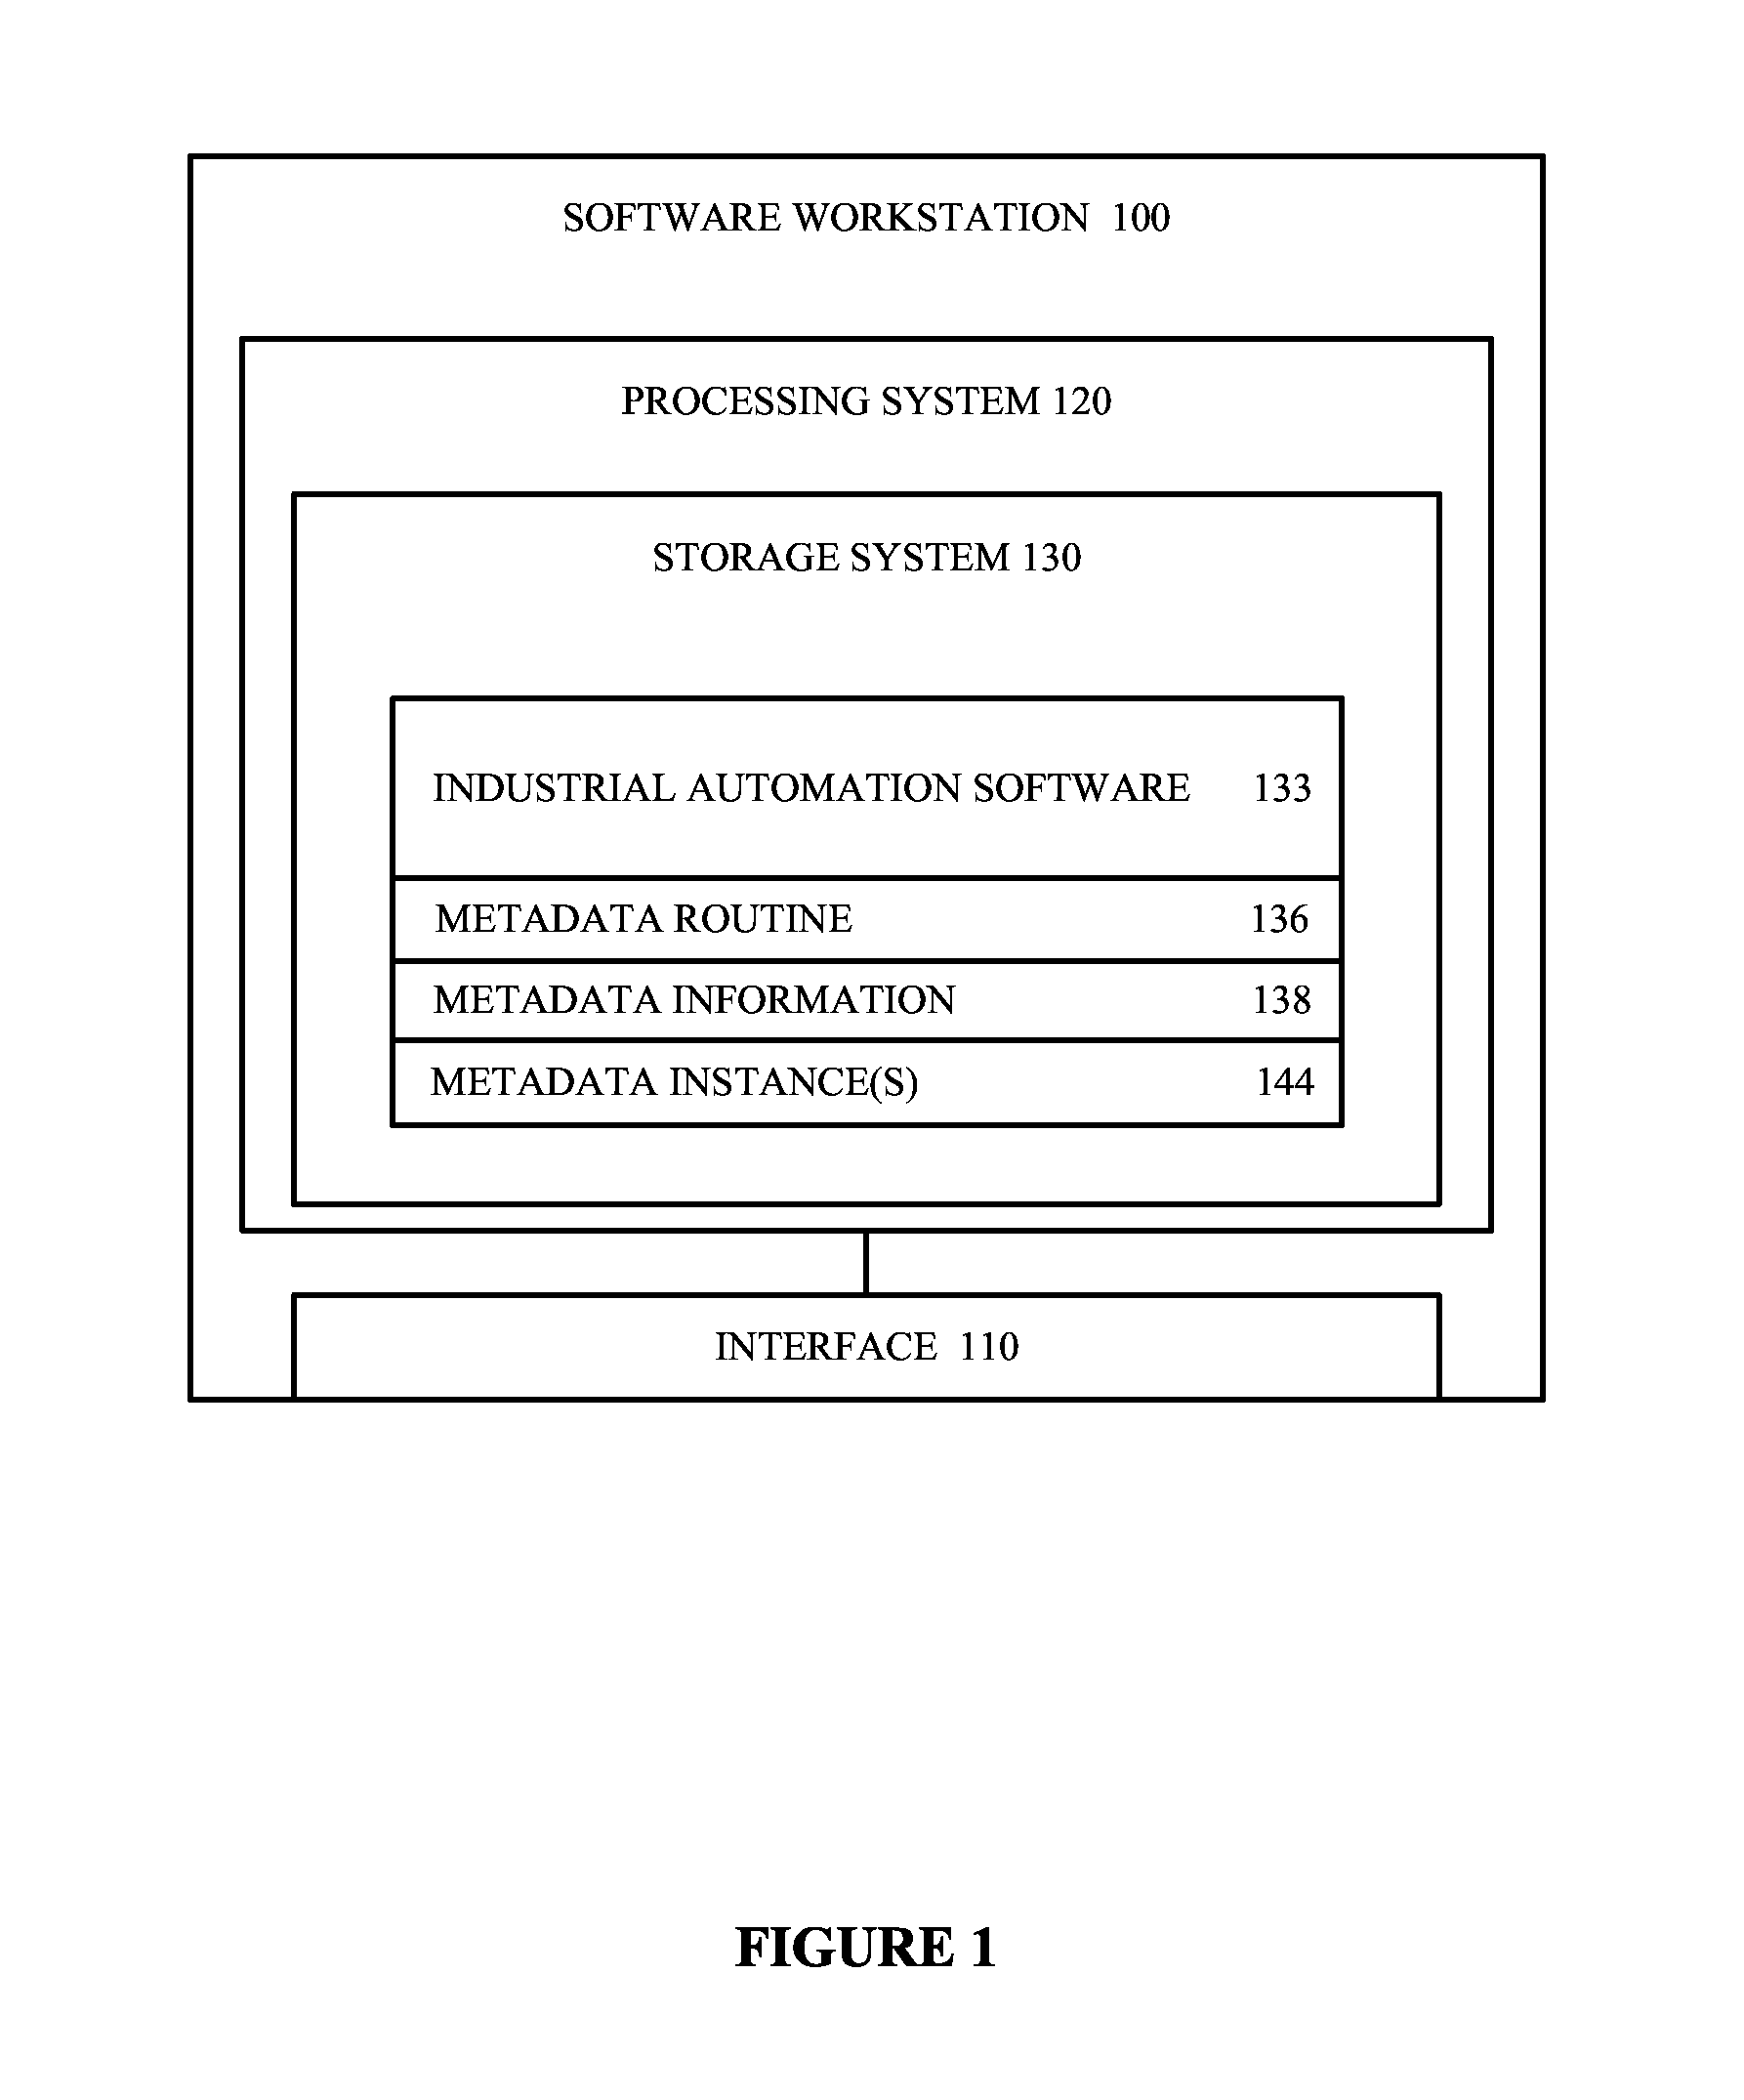 Software workstation and method for employing appended metadata in industrial automation software